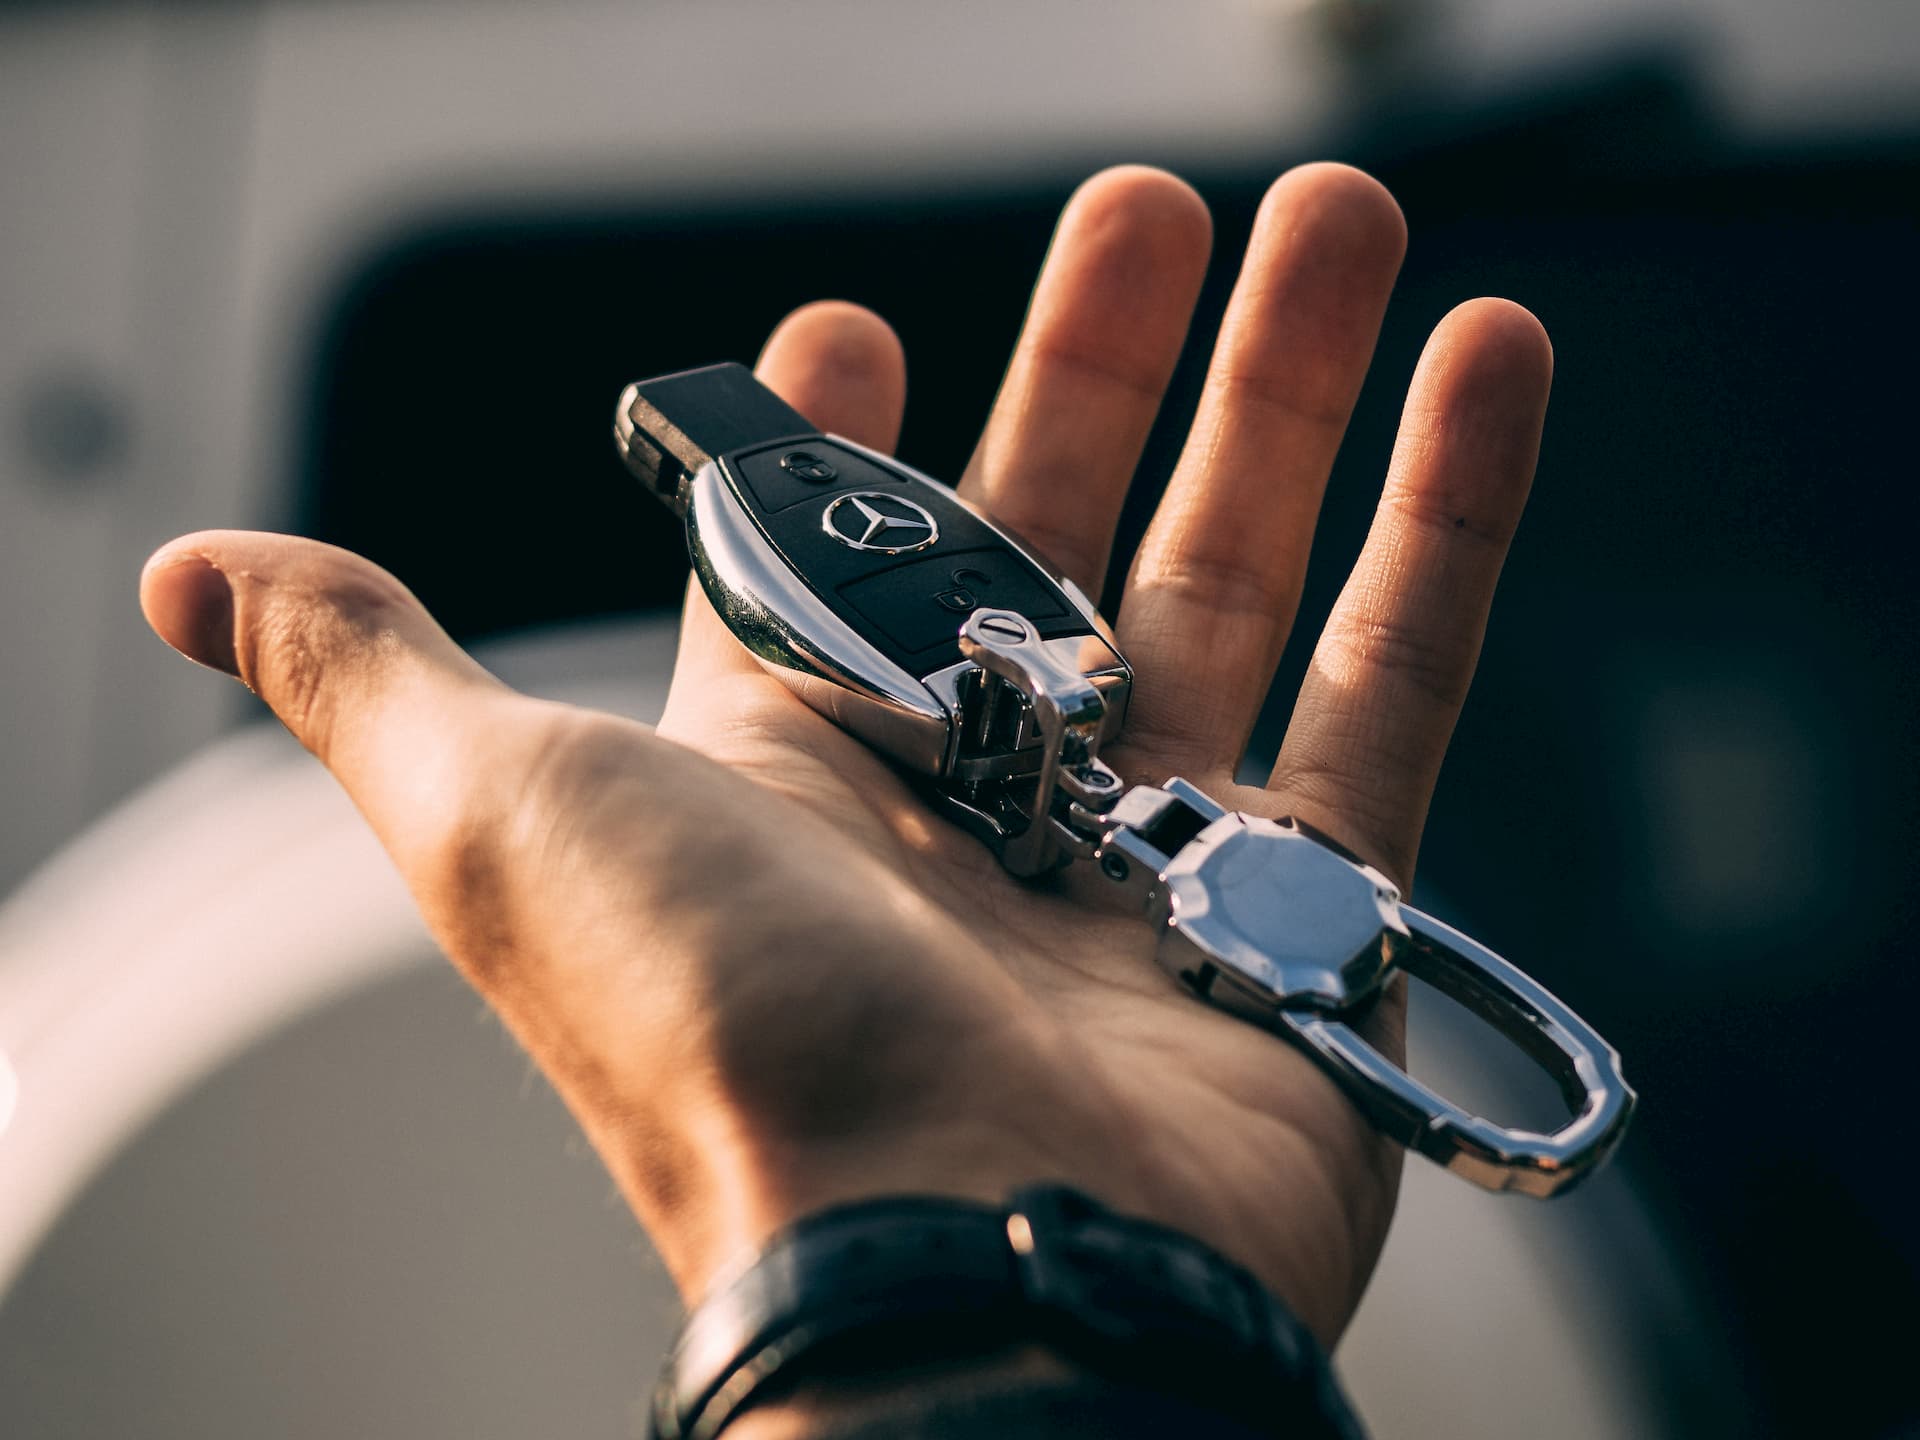 Hand Stretched Out Holding Mercedes-Benz Car Key